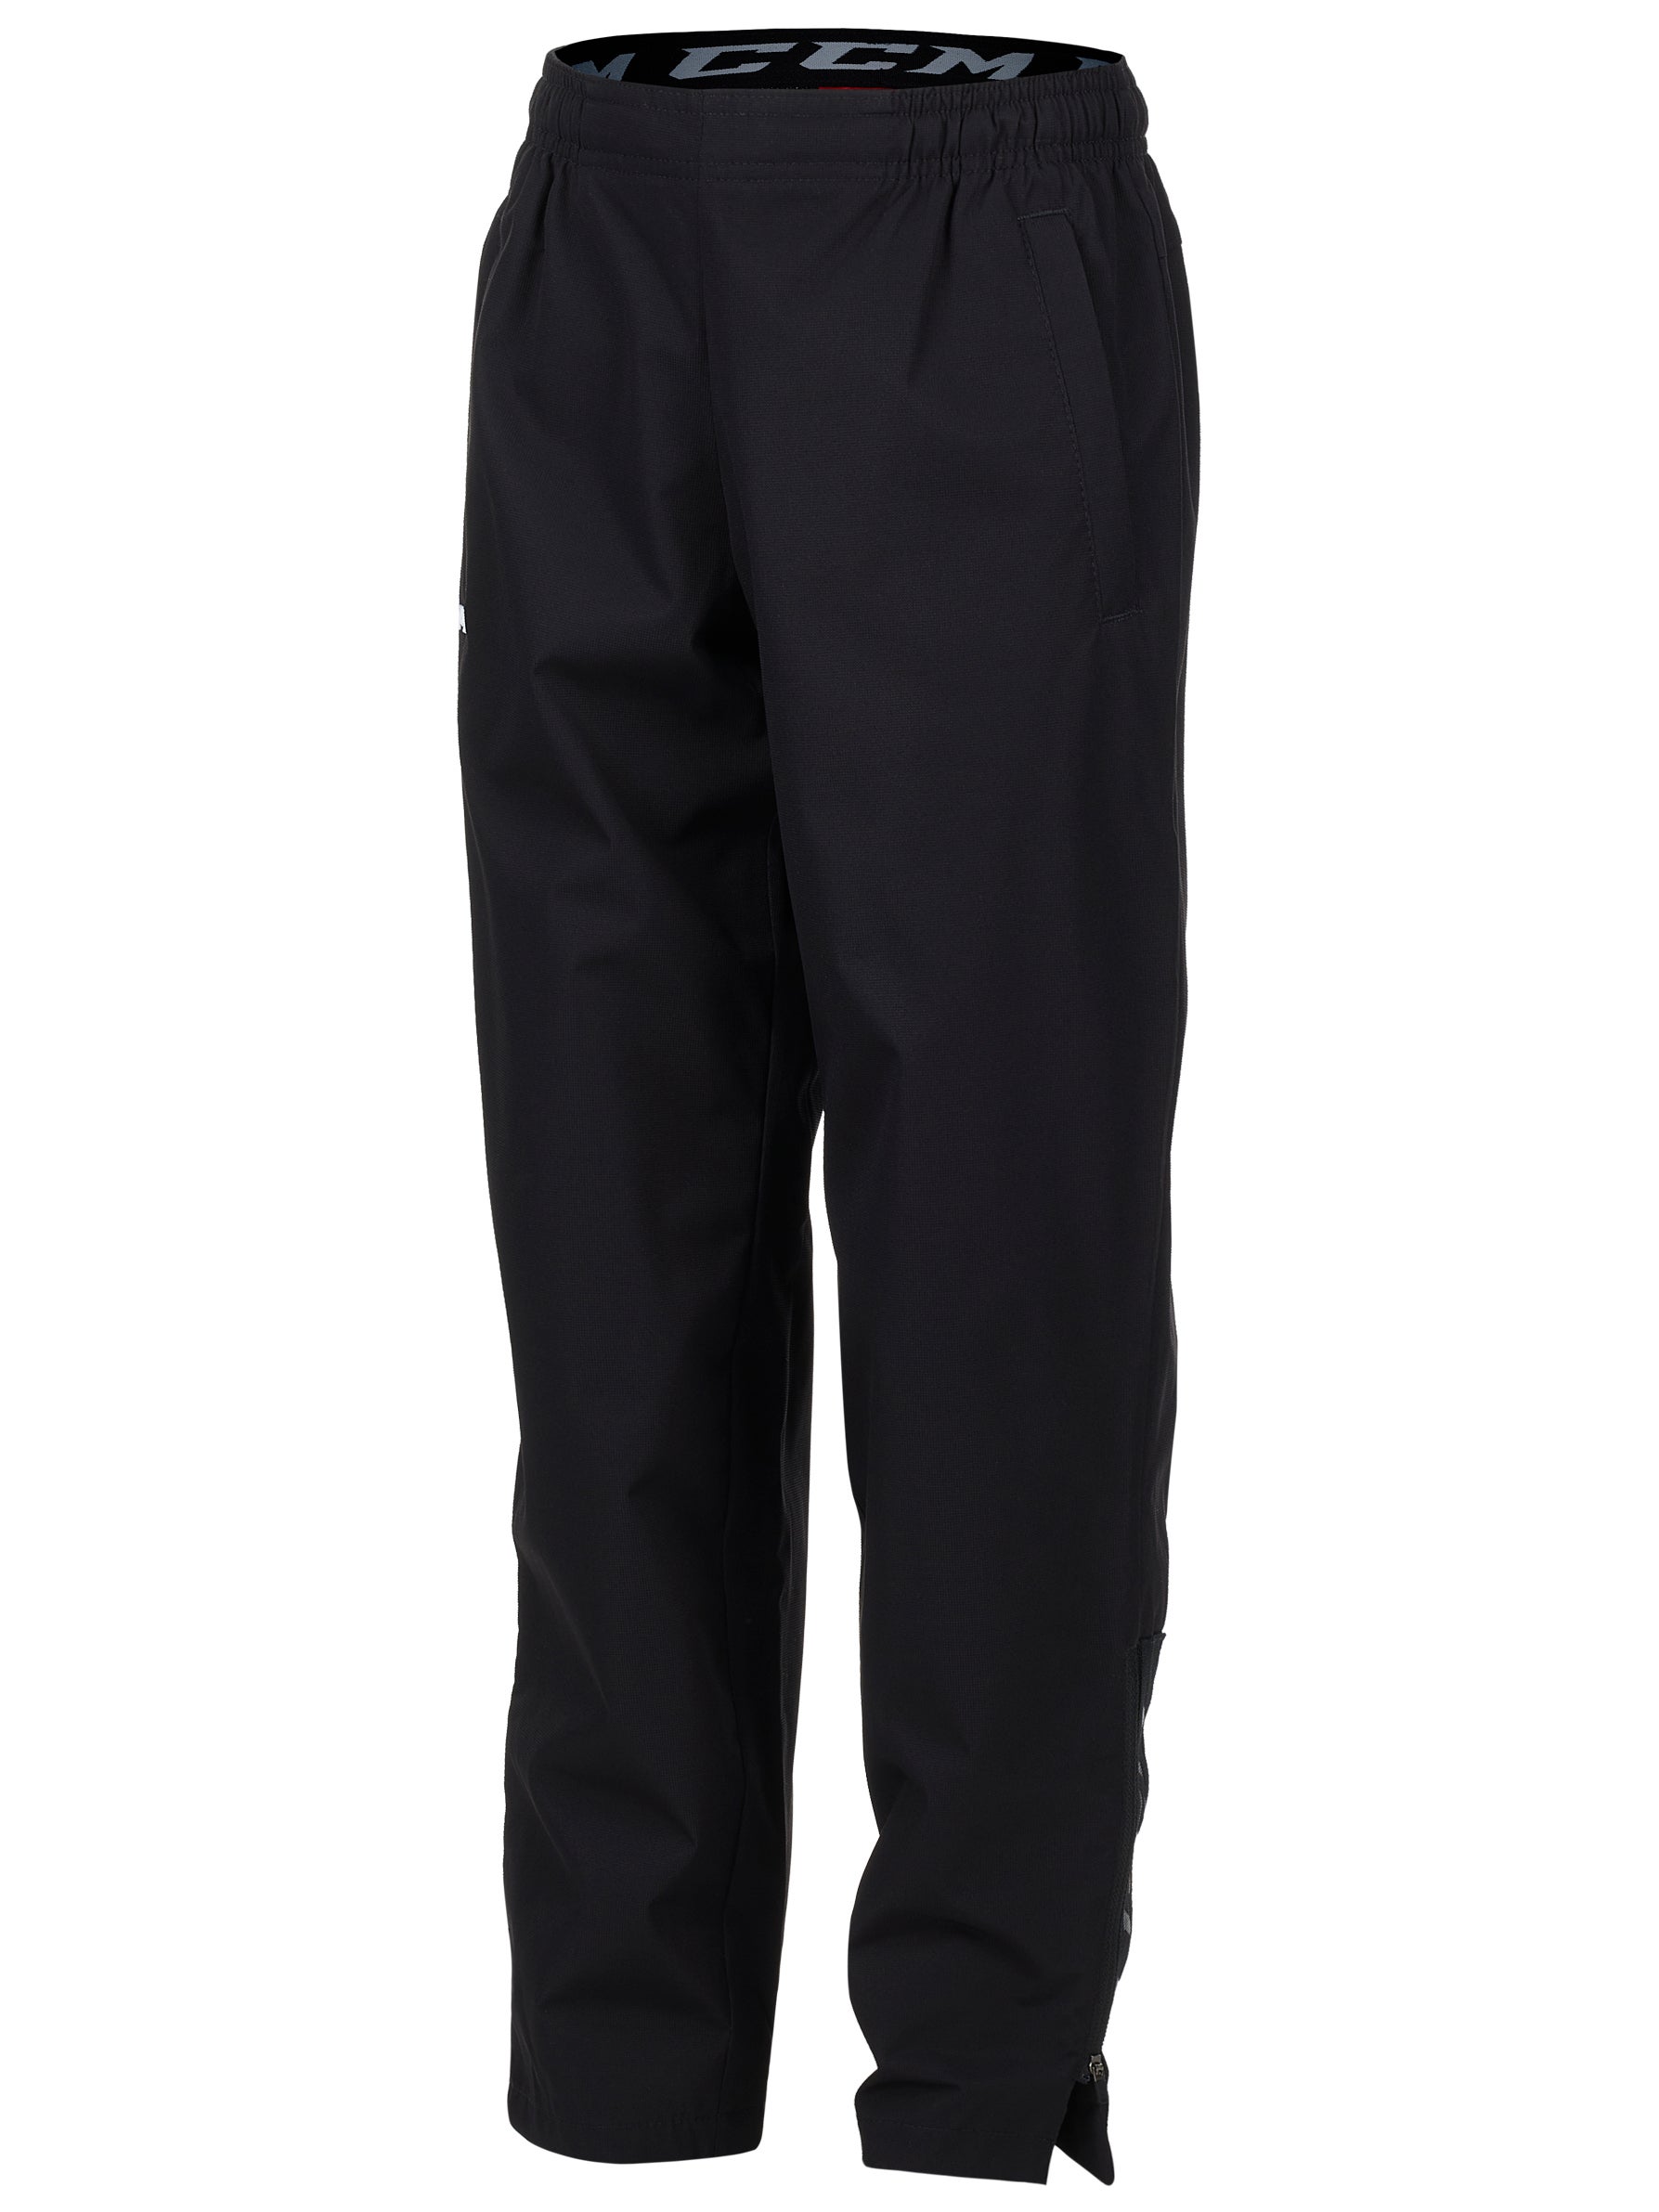 CCM Hockey Lightweight Warm Up Wind Pants All Colors All Sizes 9500 